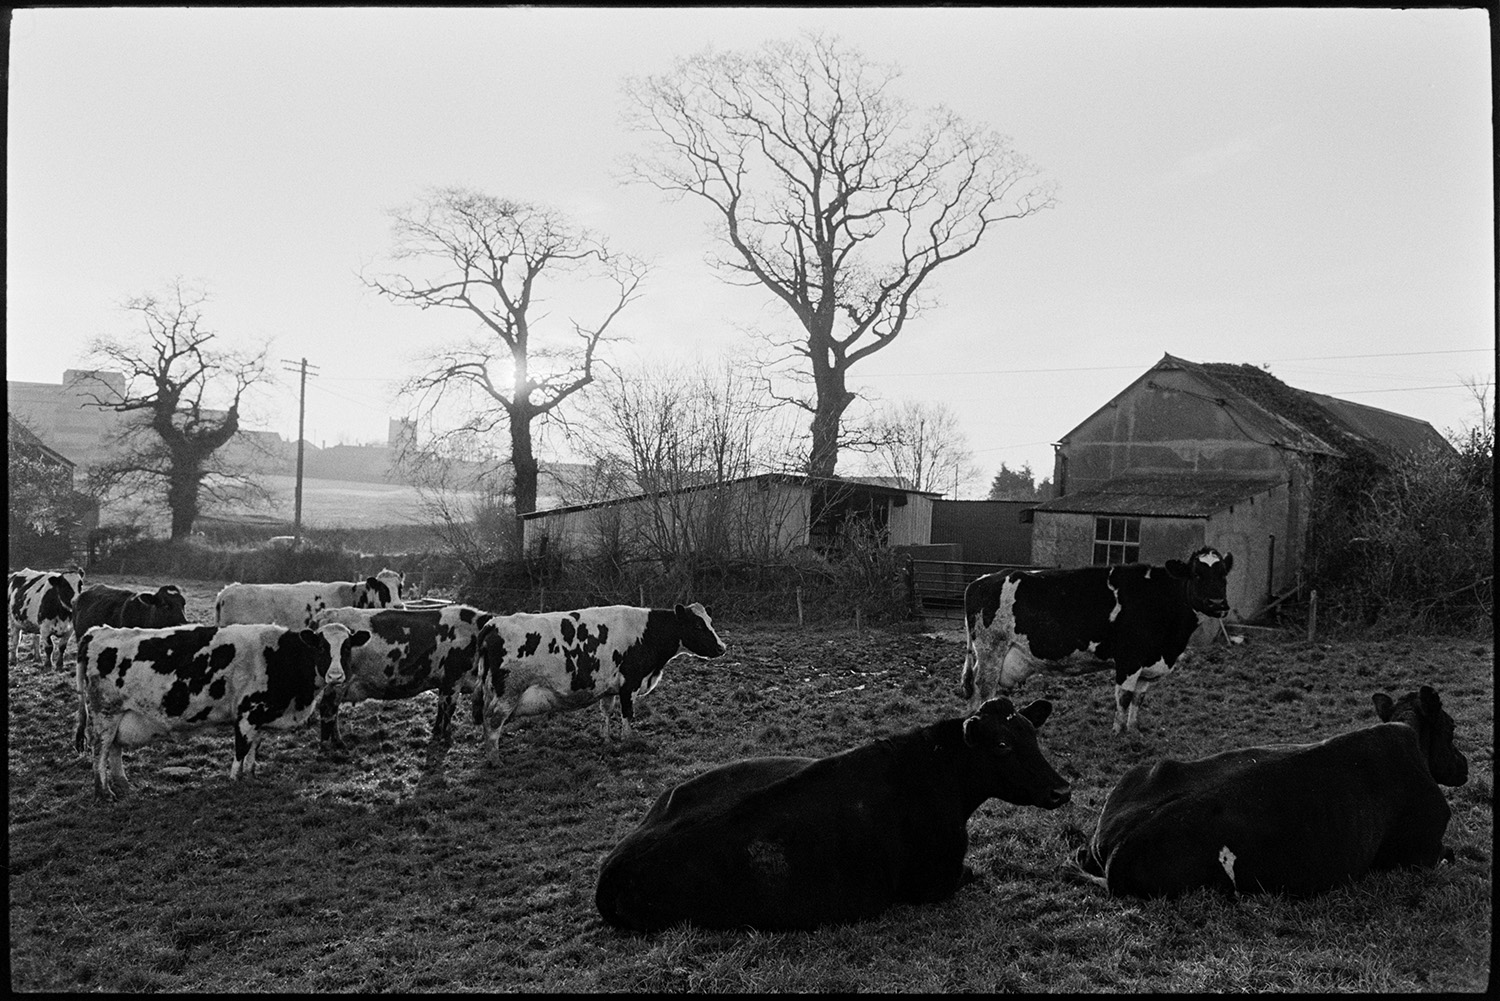 Road, cows in field on freezing day. 
[Cows in a field at Burrington on a cold day. Barns and trees can be seen in the background.]